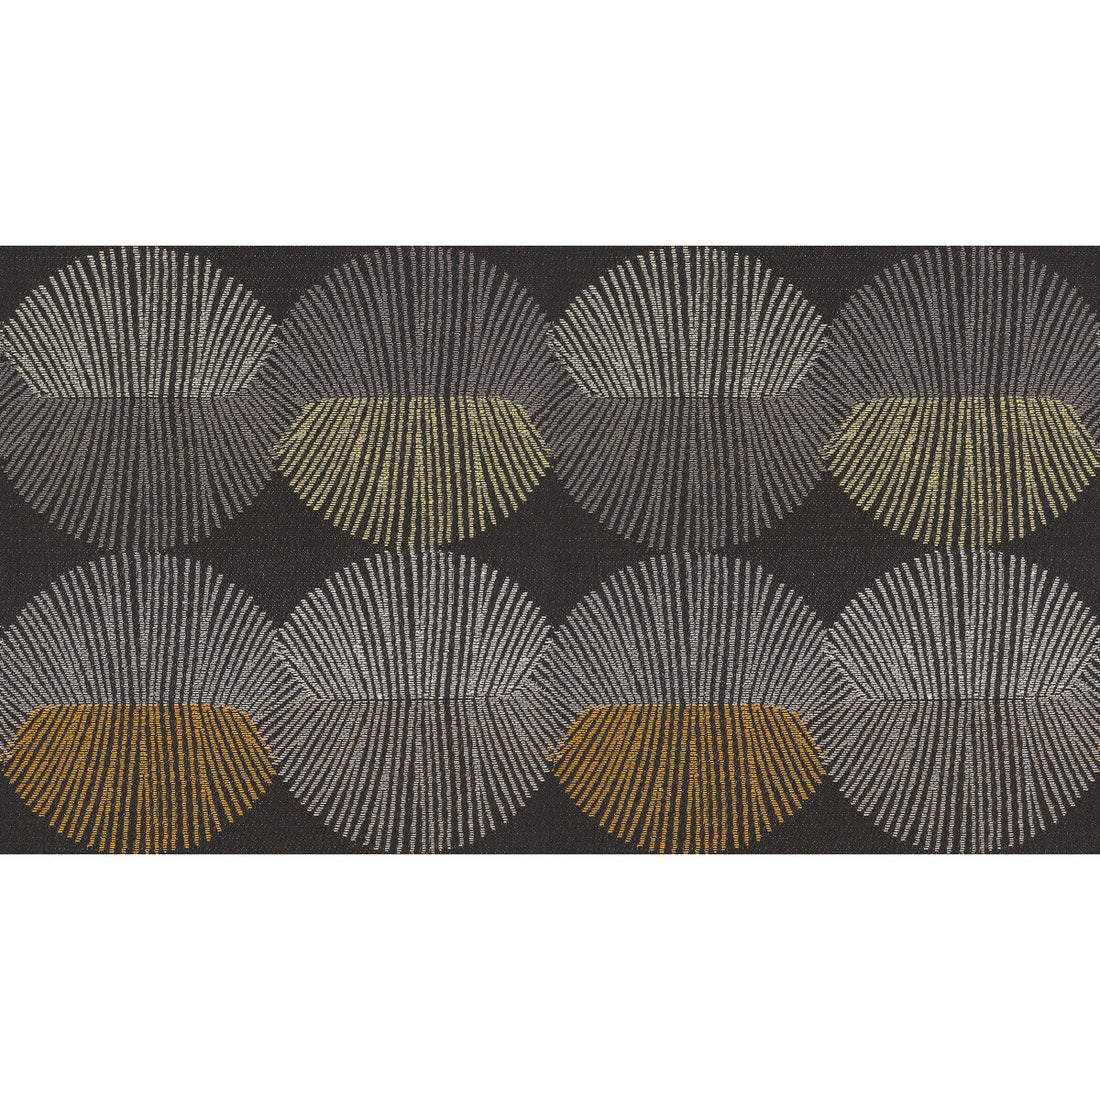 Match Maker fabric in crater color - pattern 34650.21.0 - by Kravet Contract in the Gis collection